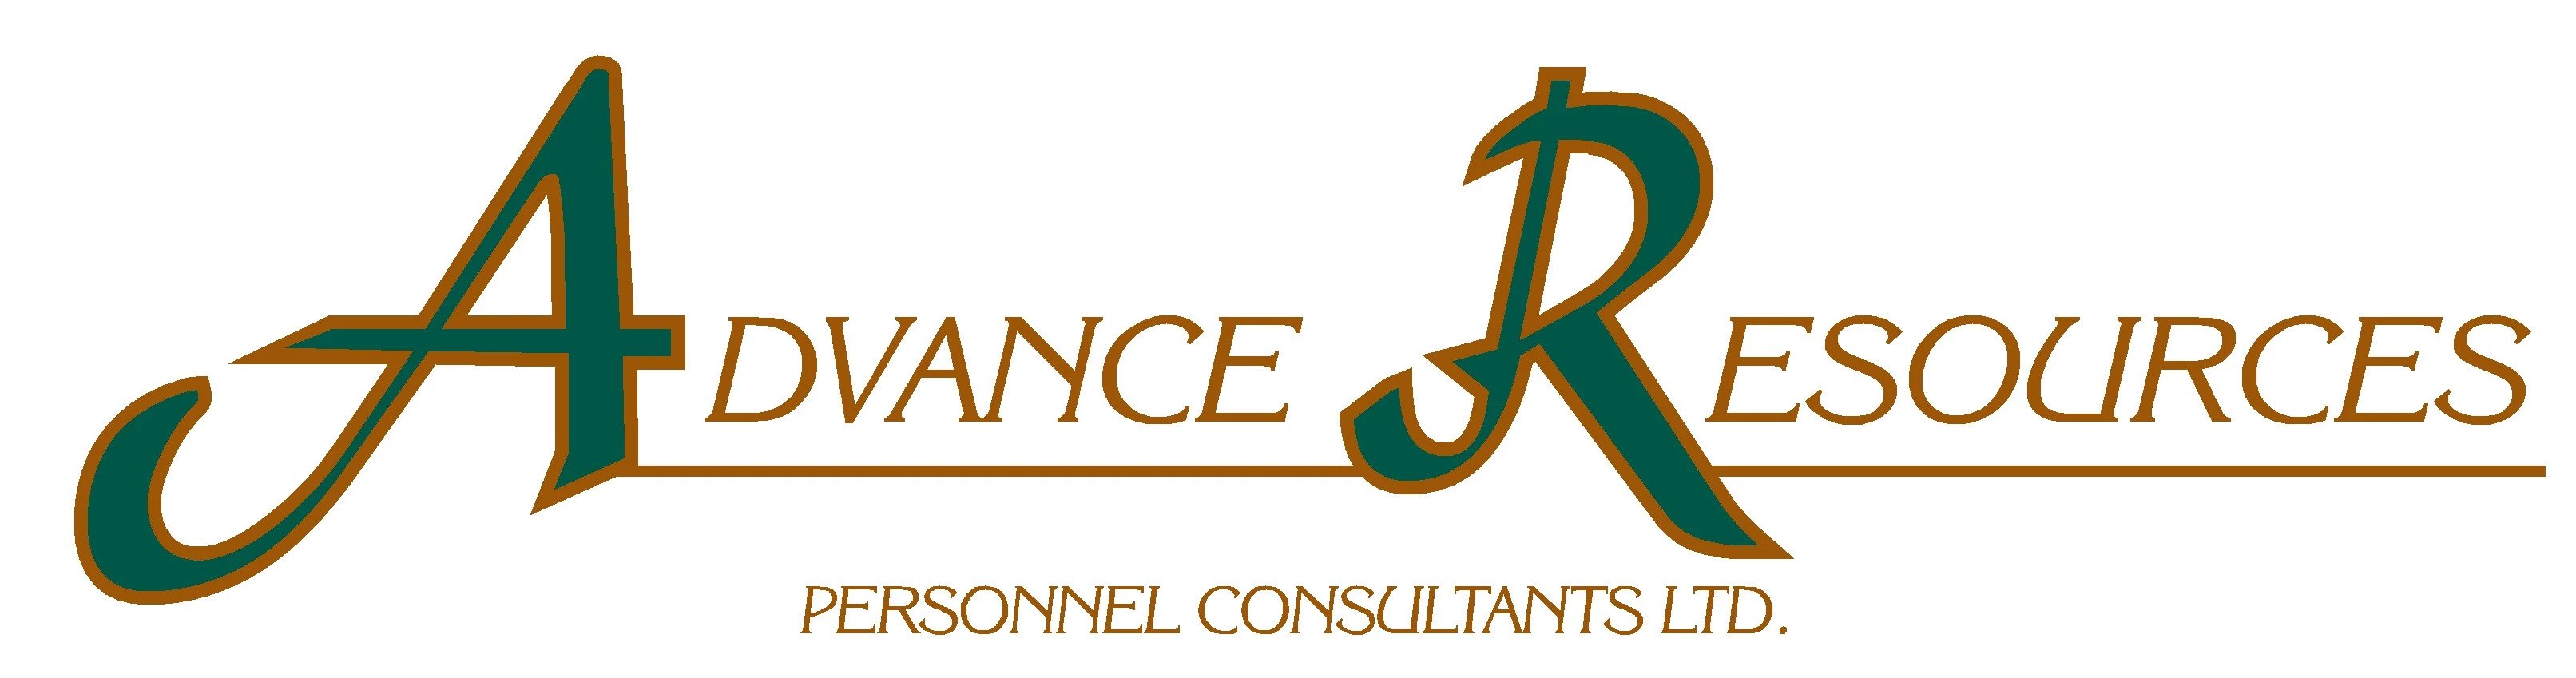 Advance Resources Personnel Consultants Limited